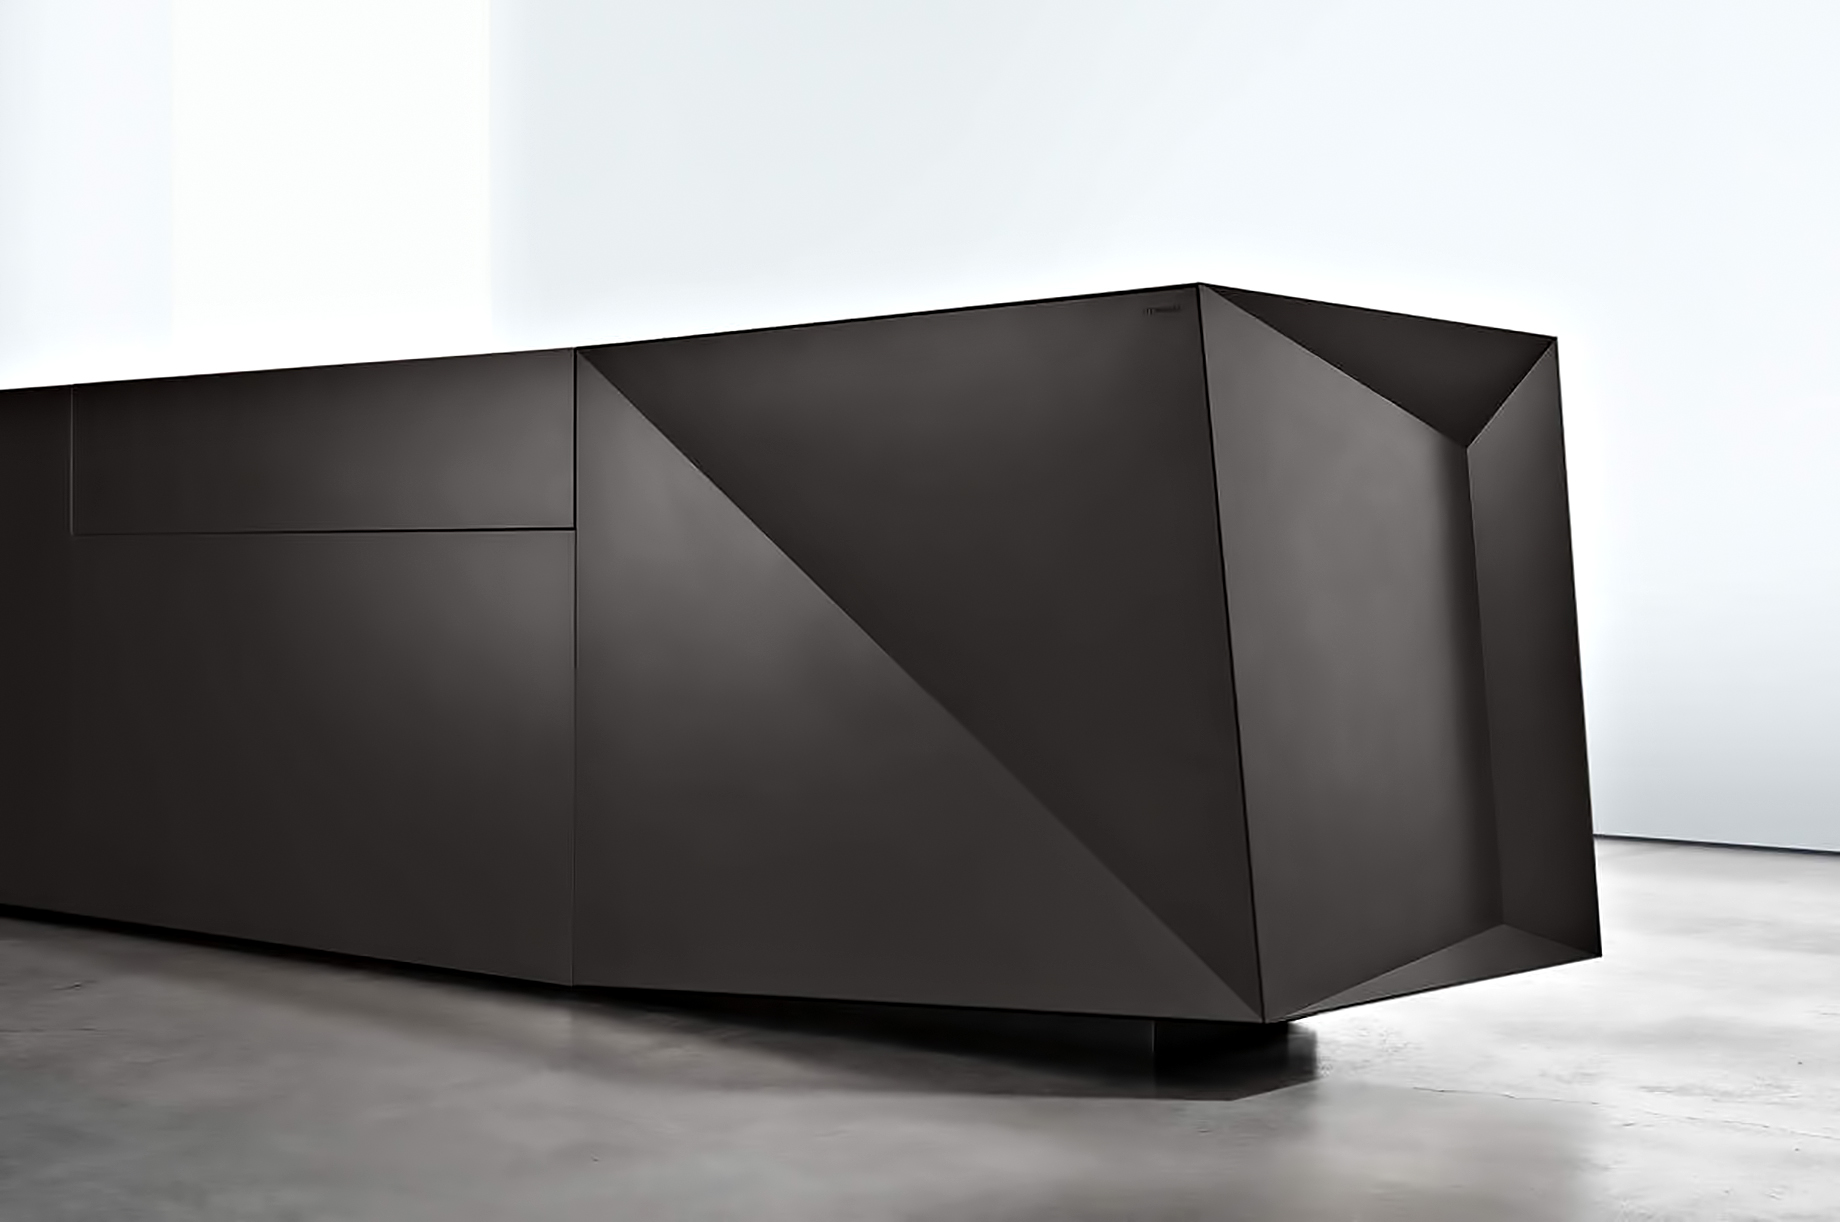 Iconic Steininger FOLD High Tech Kitchen Block Design Inspired by Origami - Formidable Black